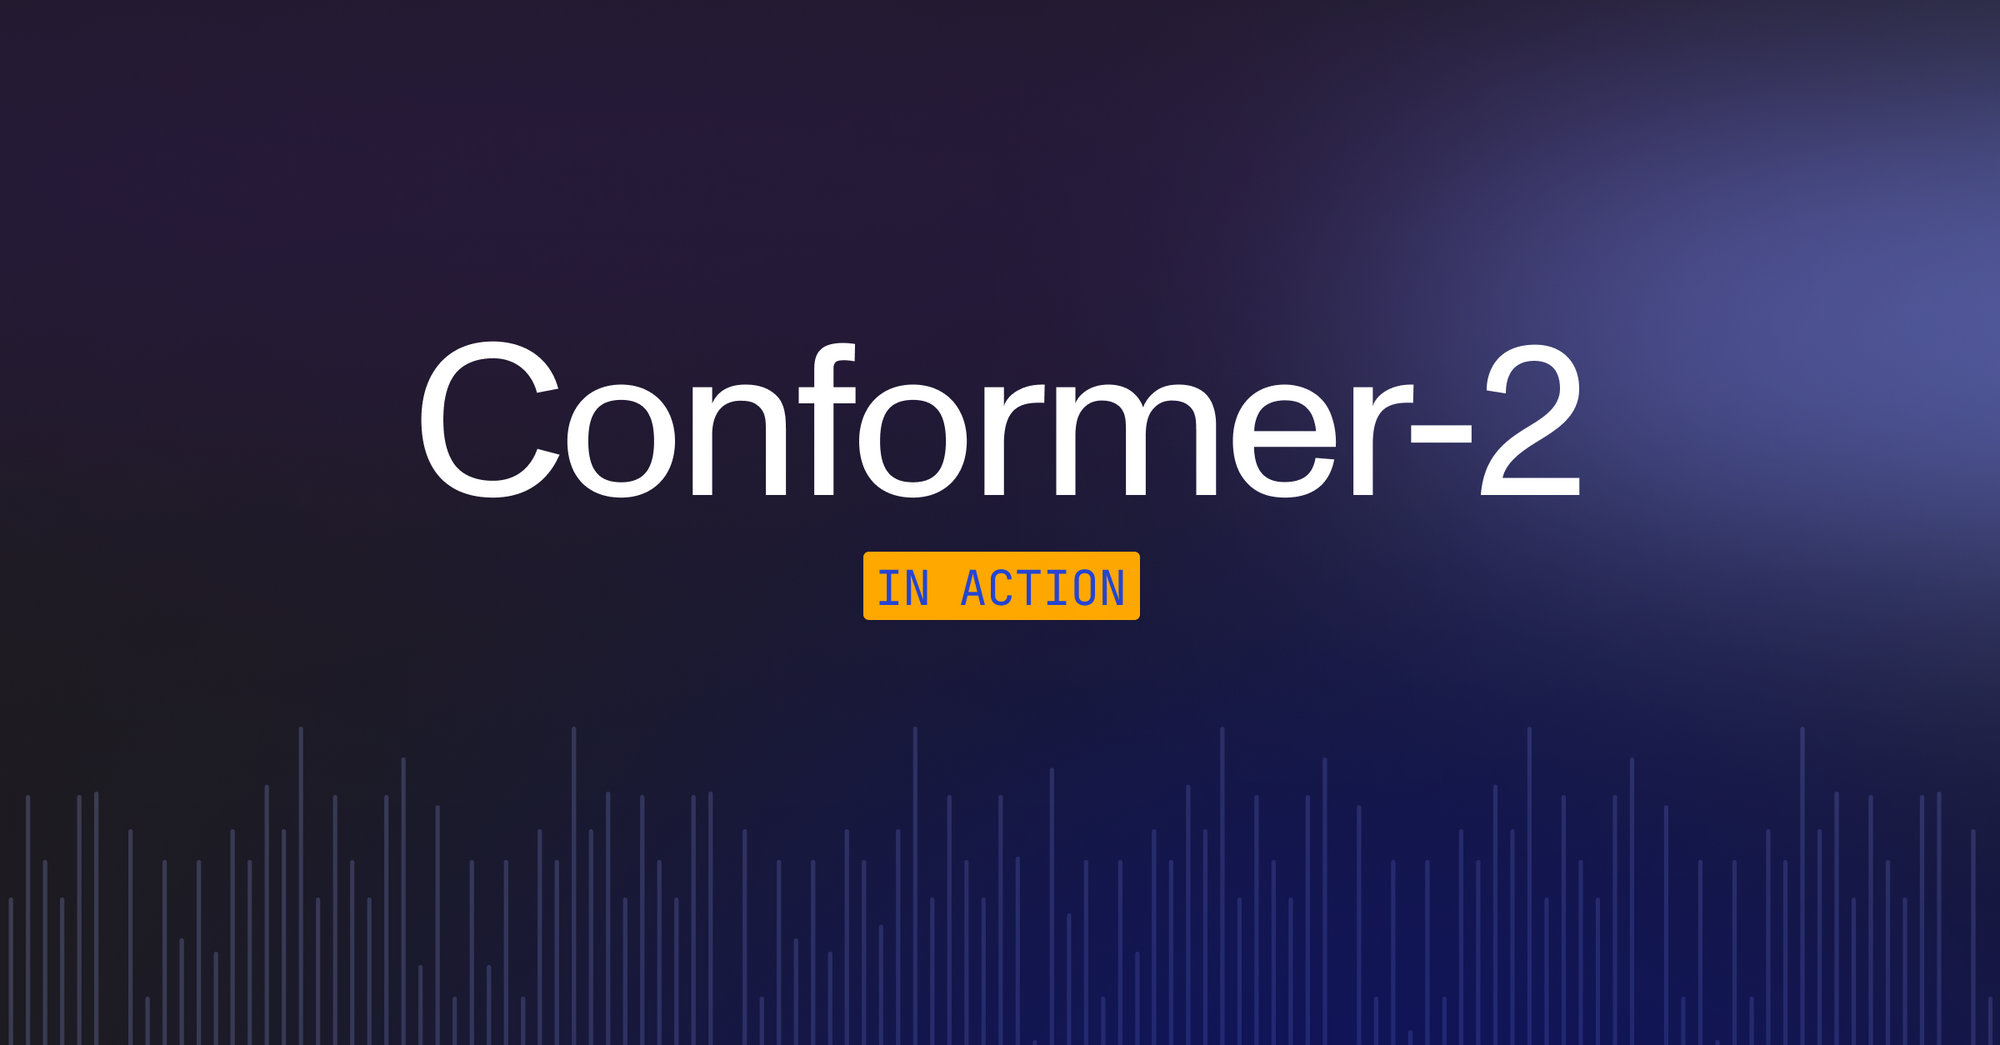 Customer Stories: Conformer-2 in Action